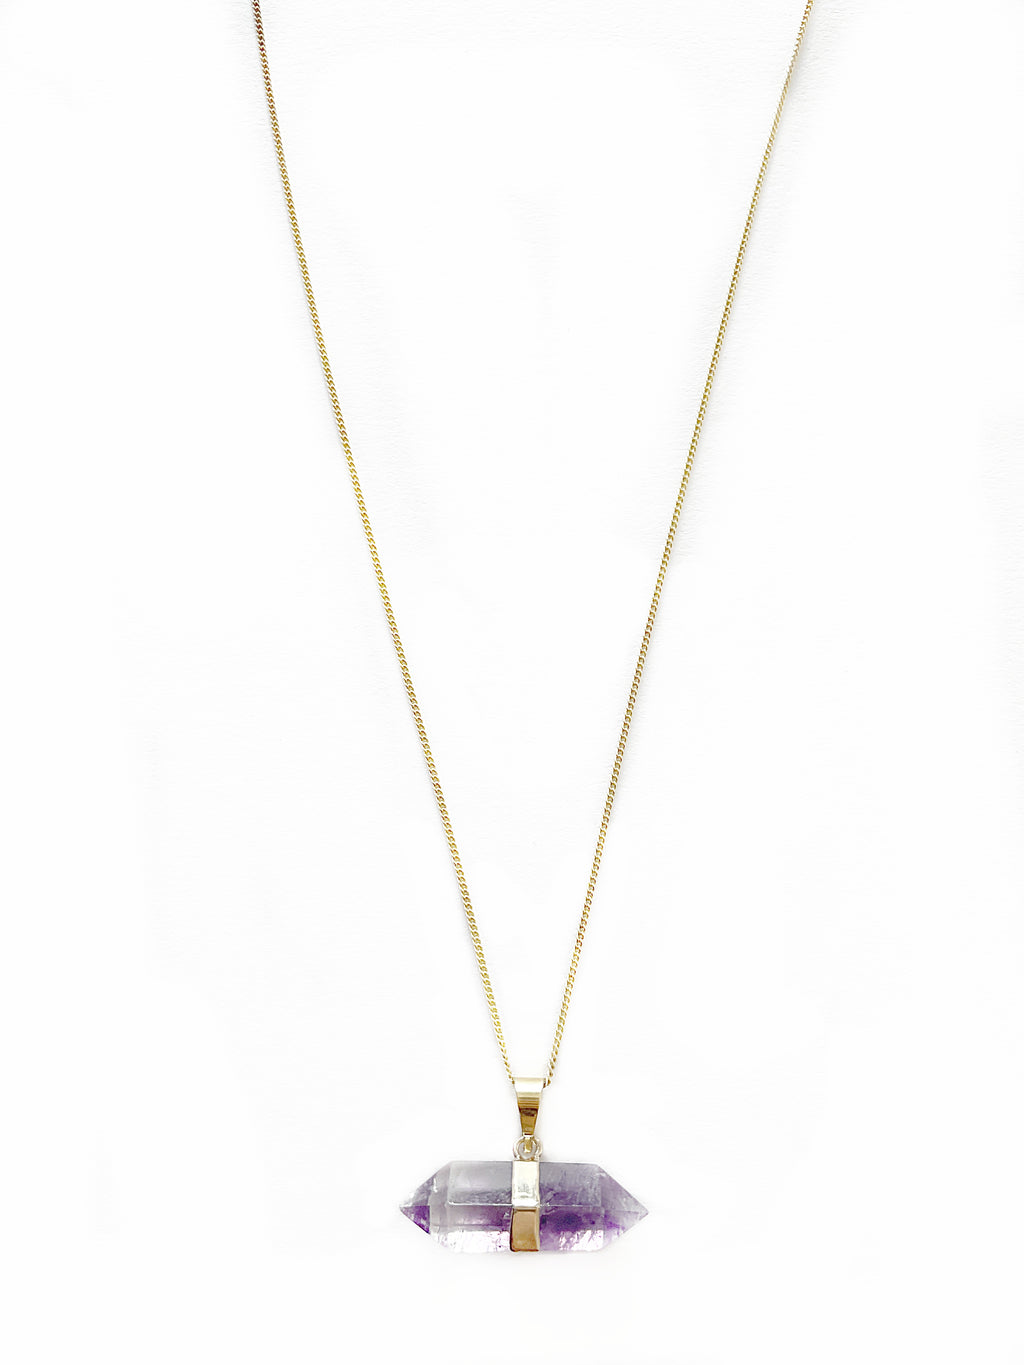 Amethyst Diamond Necklace Gold Plated